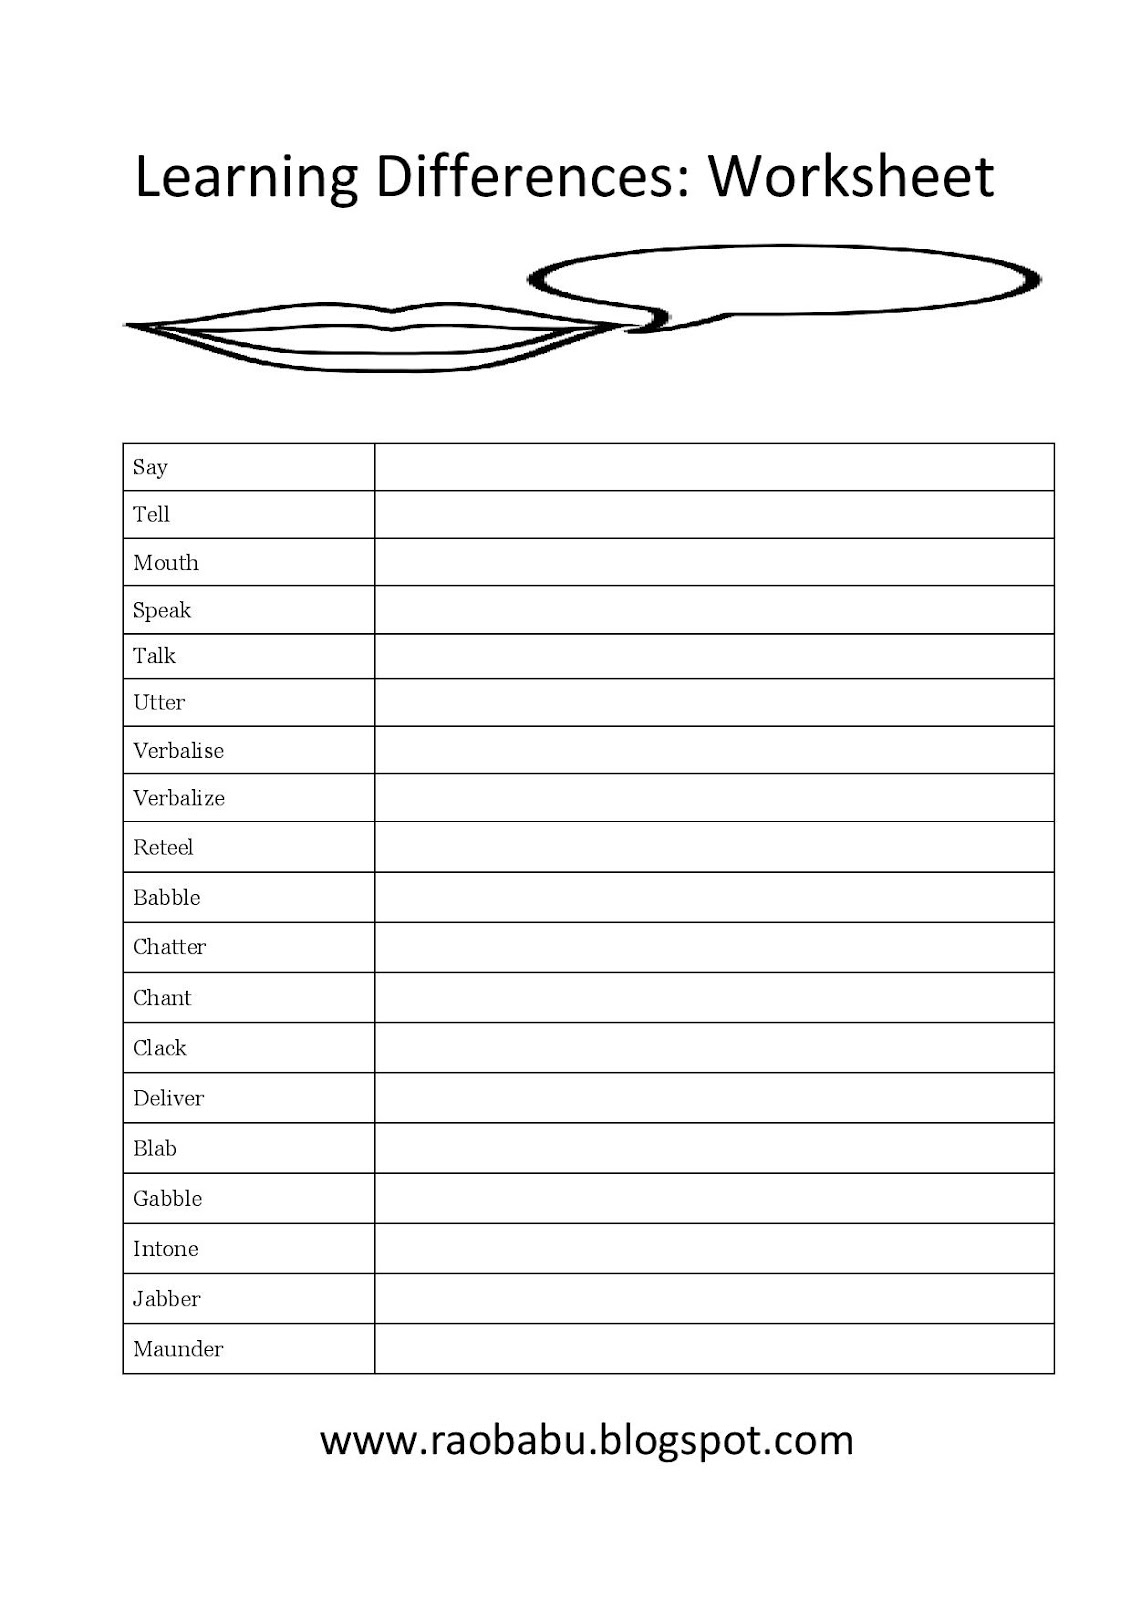 Learn English Learning Differences Worksheet